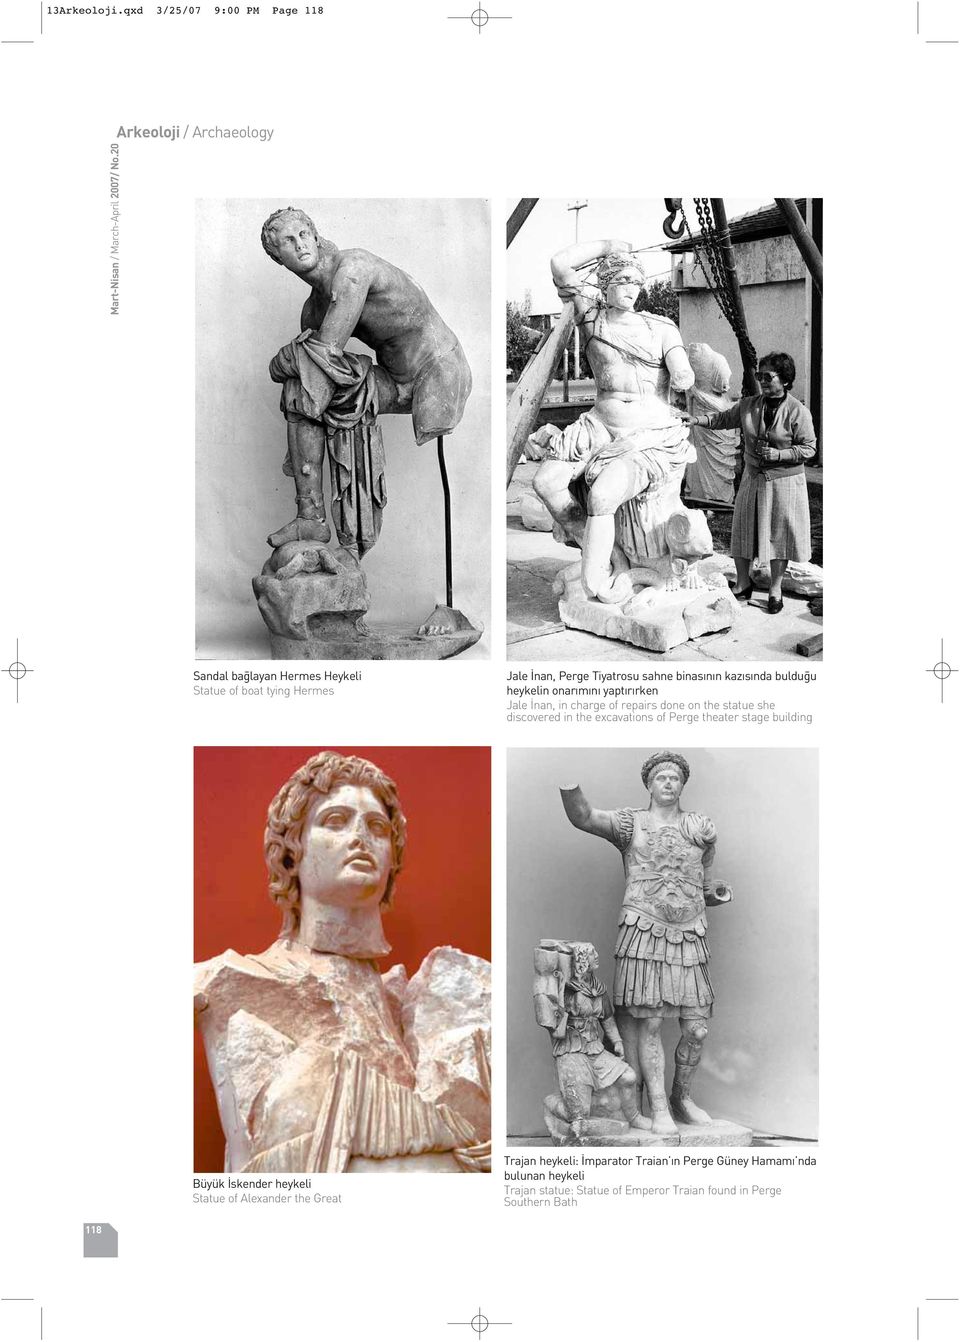 buldu u heykelin onar m n yapt r rken Jale nan, in charge of repairs done on the statue she discovered in the excavations of Perge theater